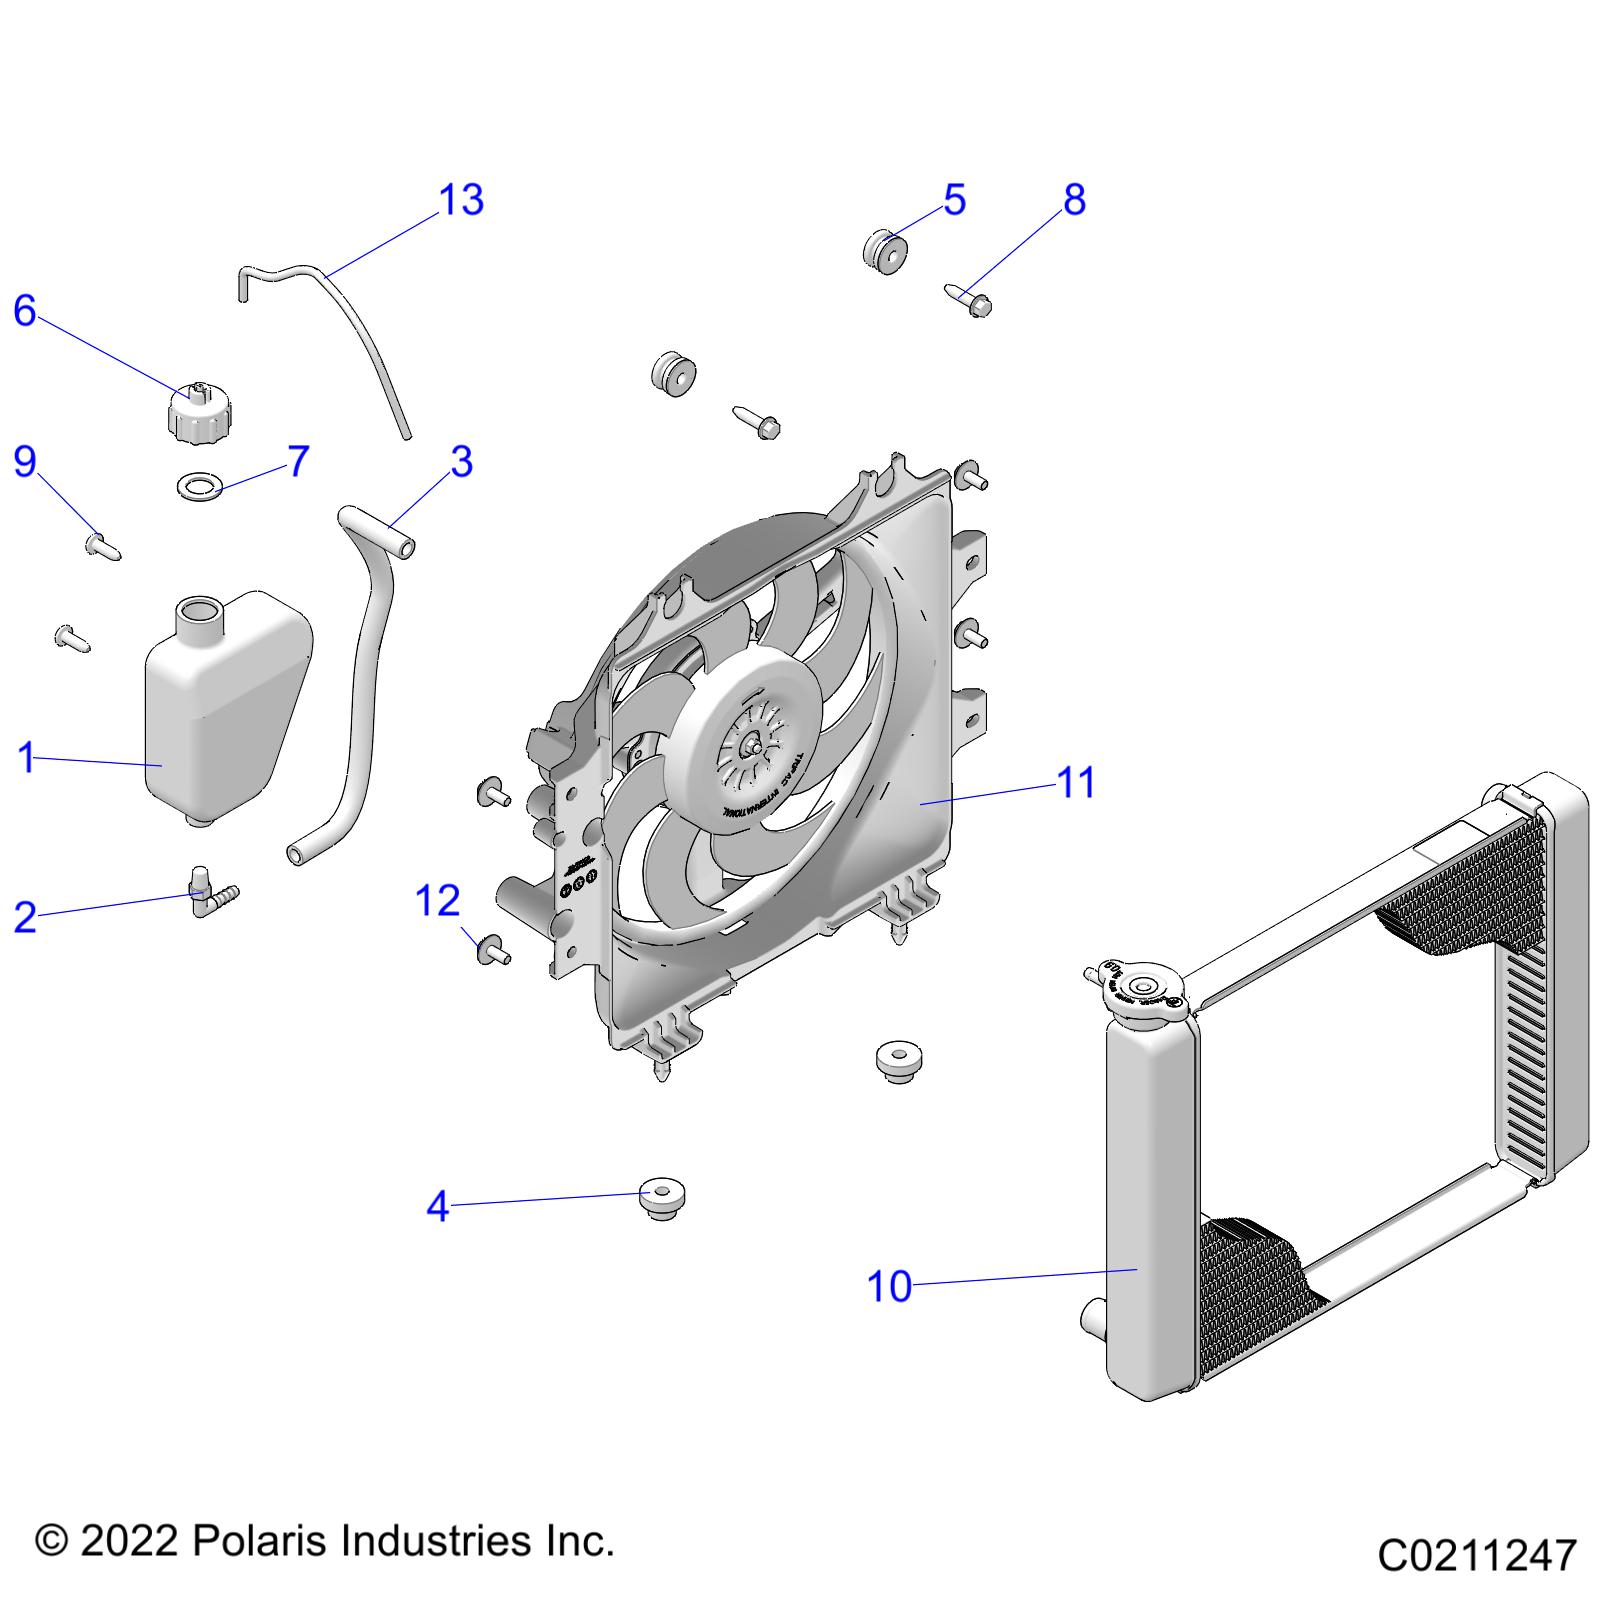 Part Number : 5416503 GROMMET AND INSERT ASSEMBLY